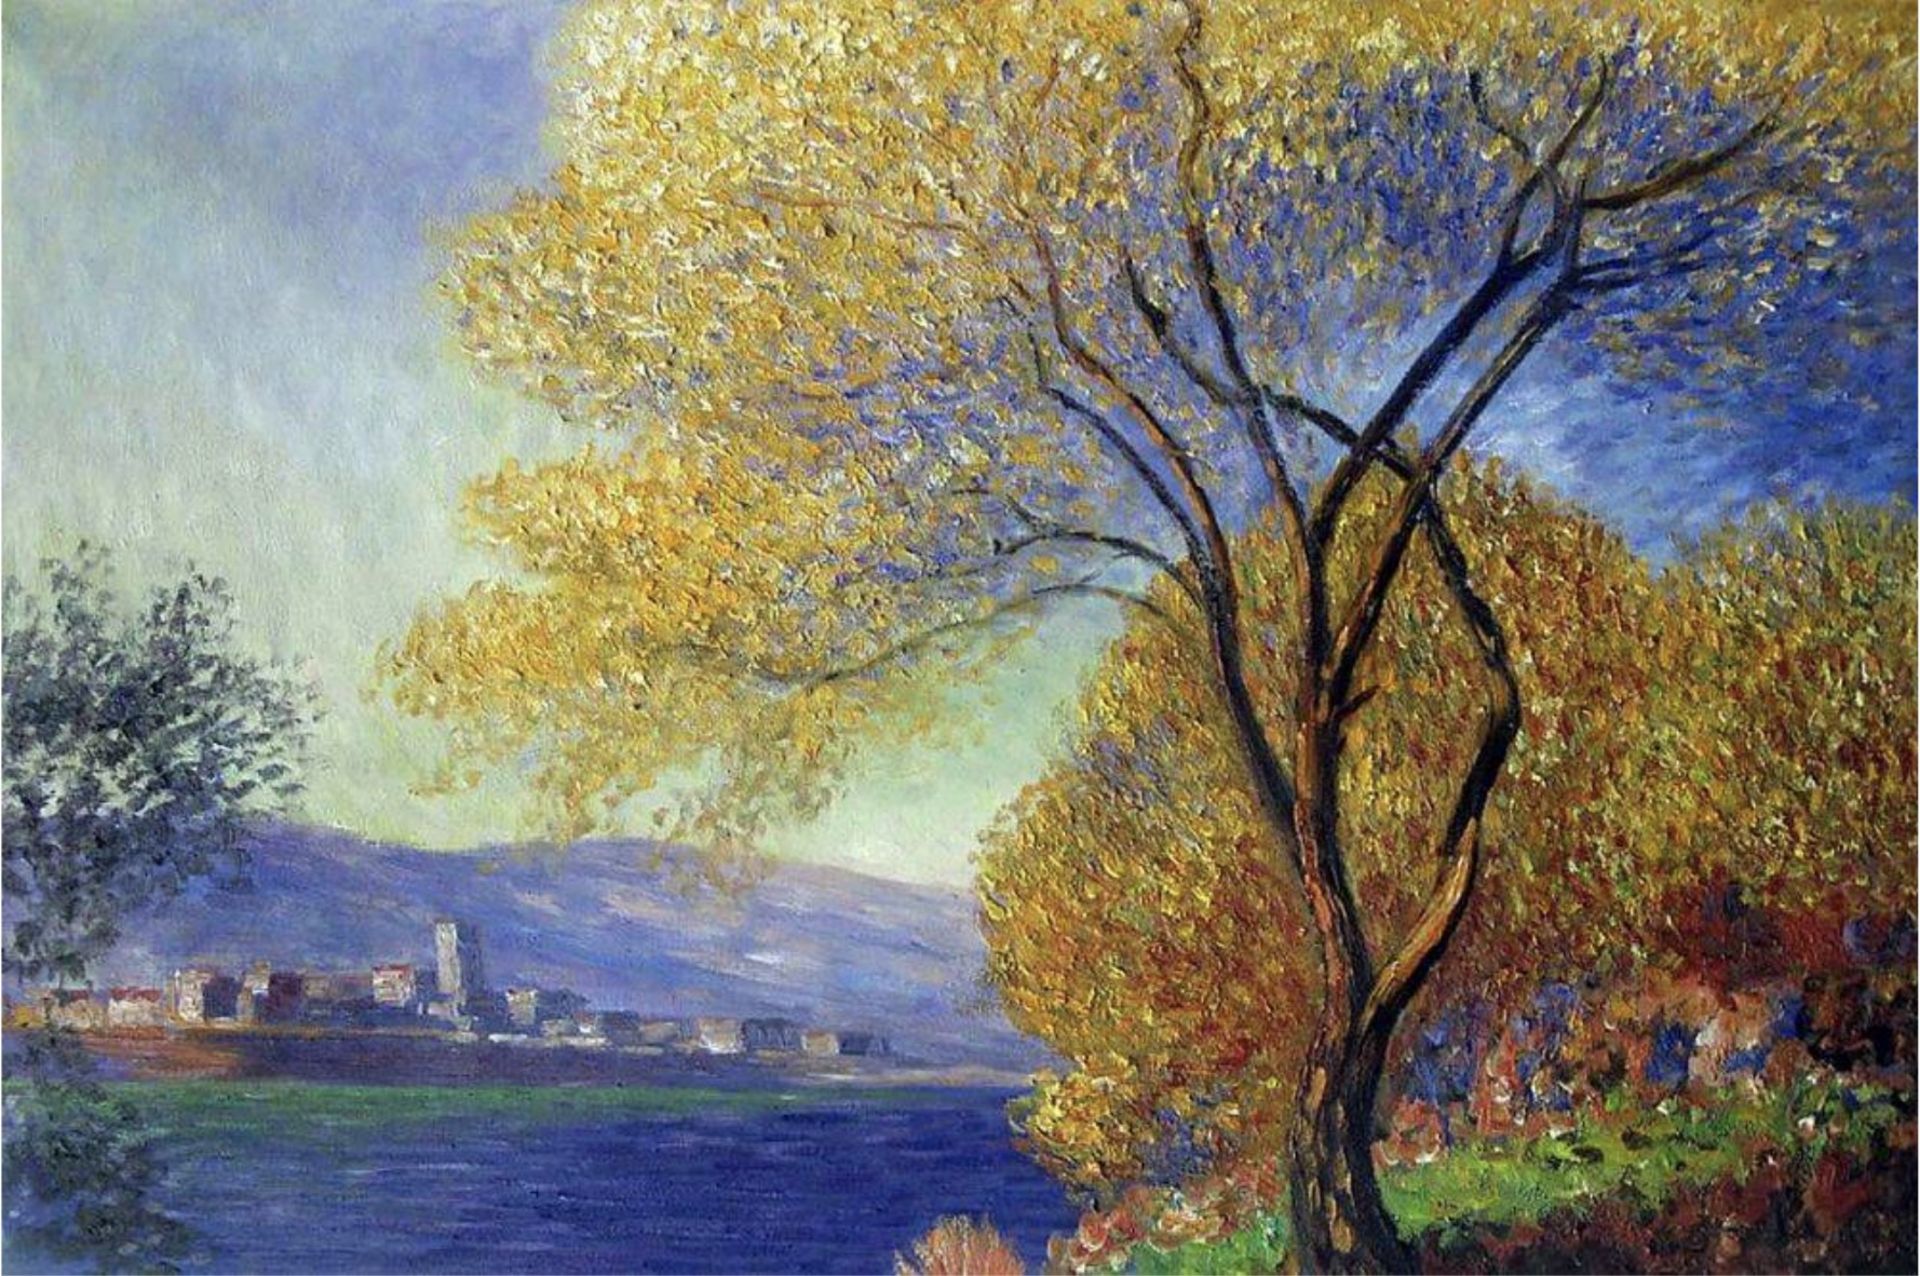 Claude Monet "Antibes, View of Salis, 1888" Oil Painting